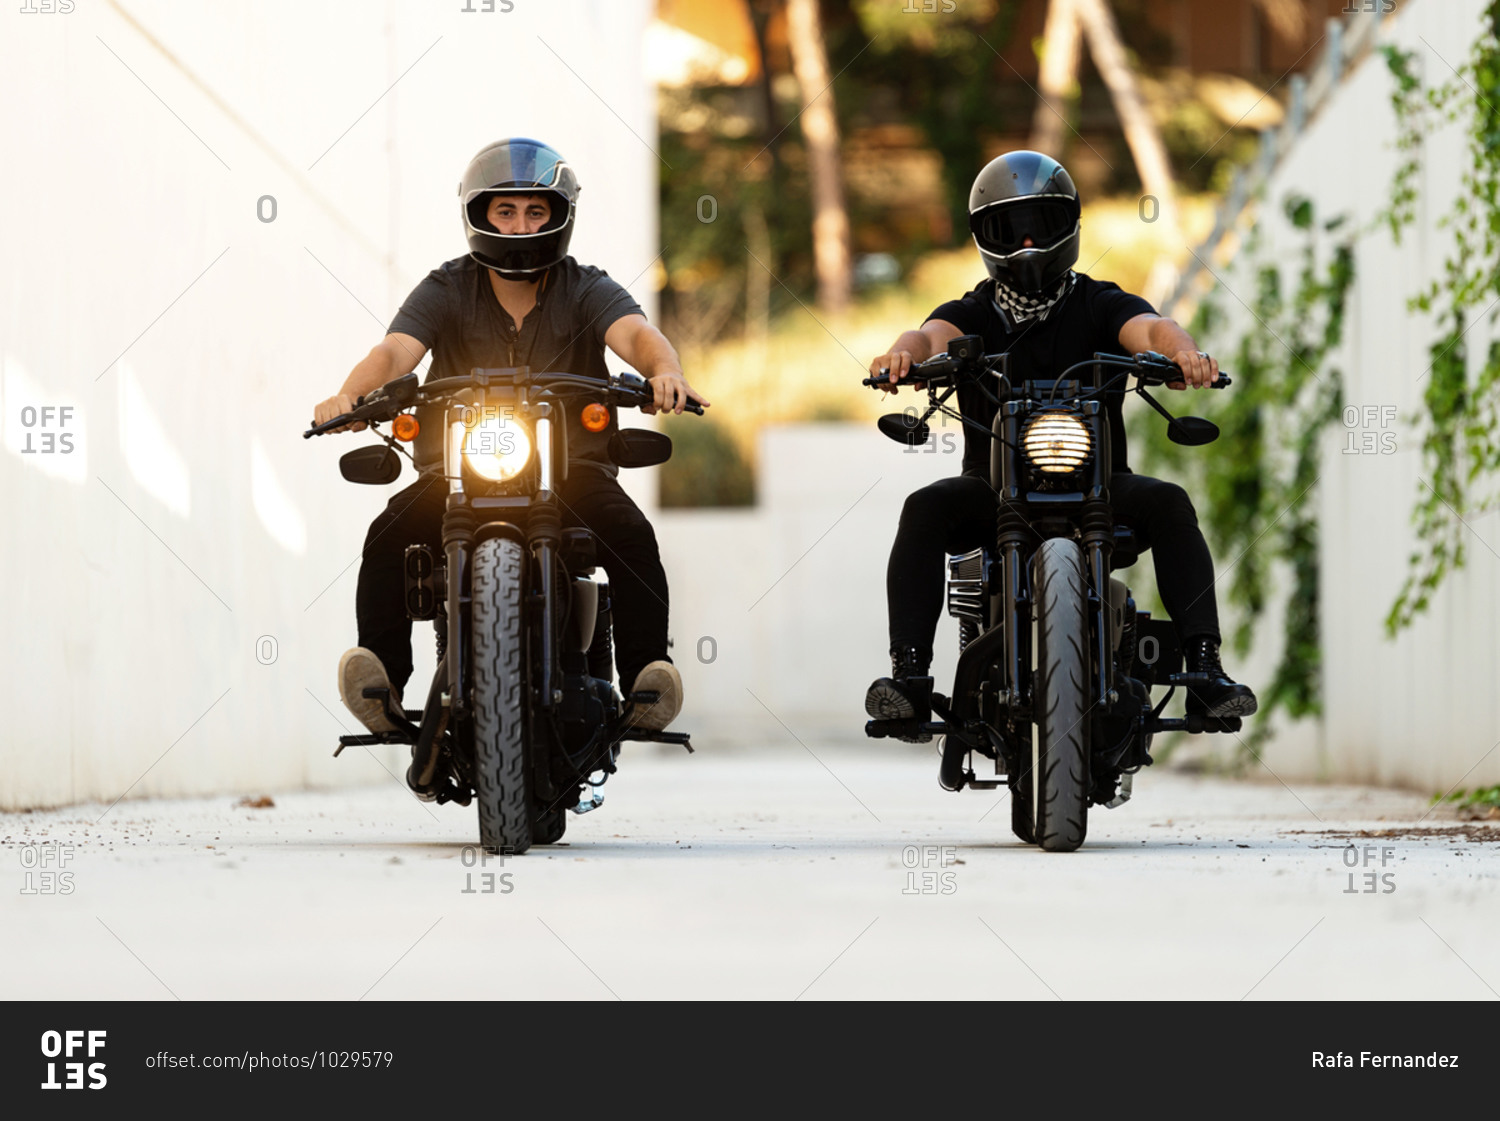 Two bikers riding on cafe racer motorcycles with lights on